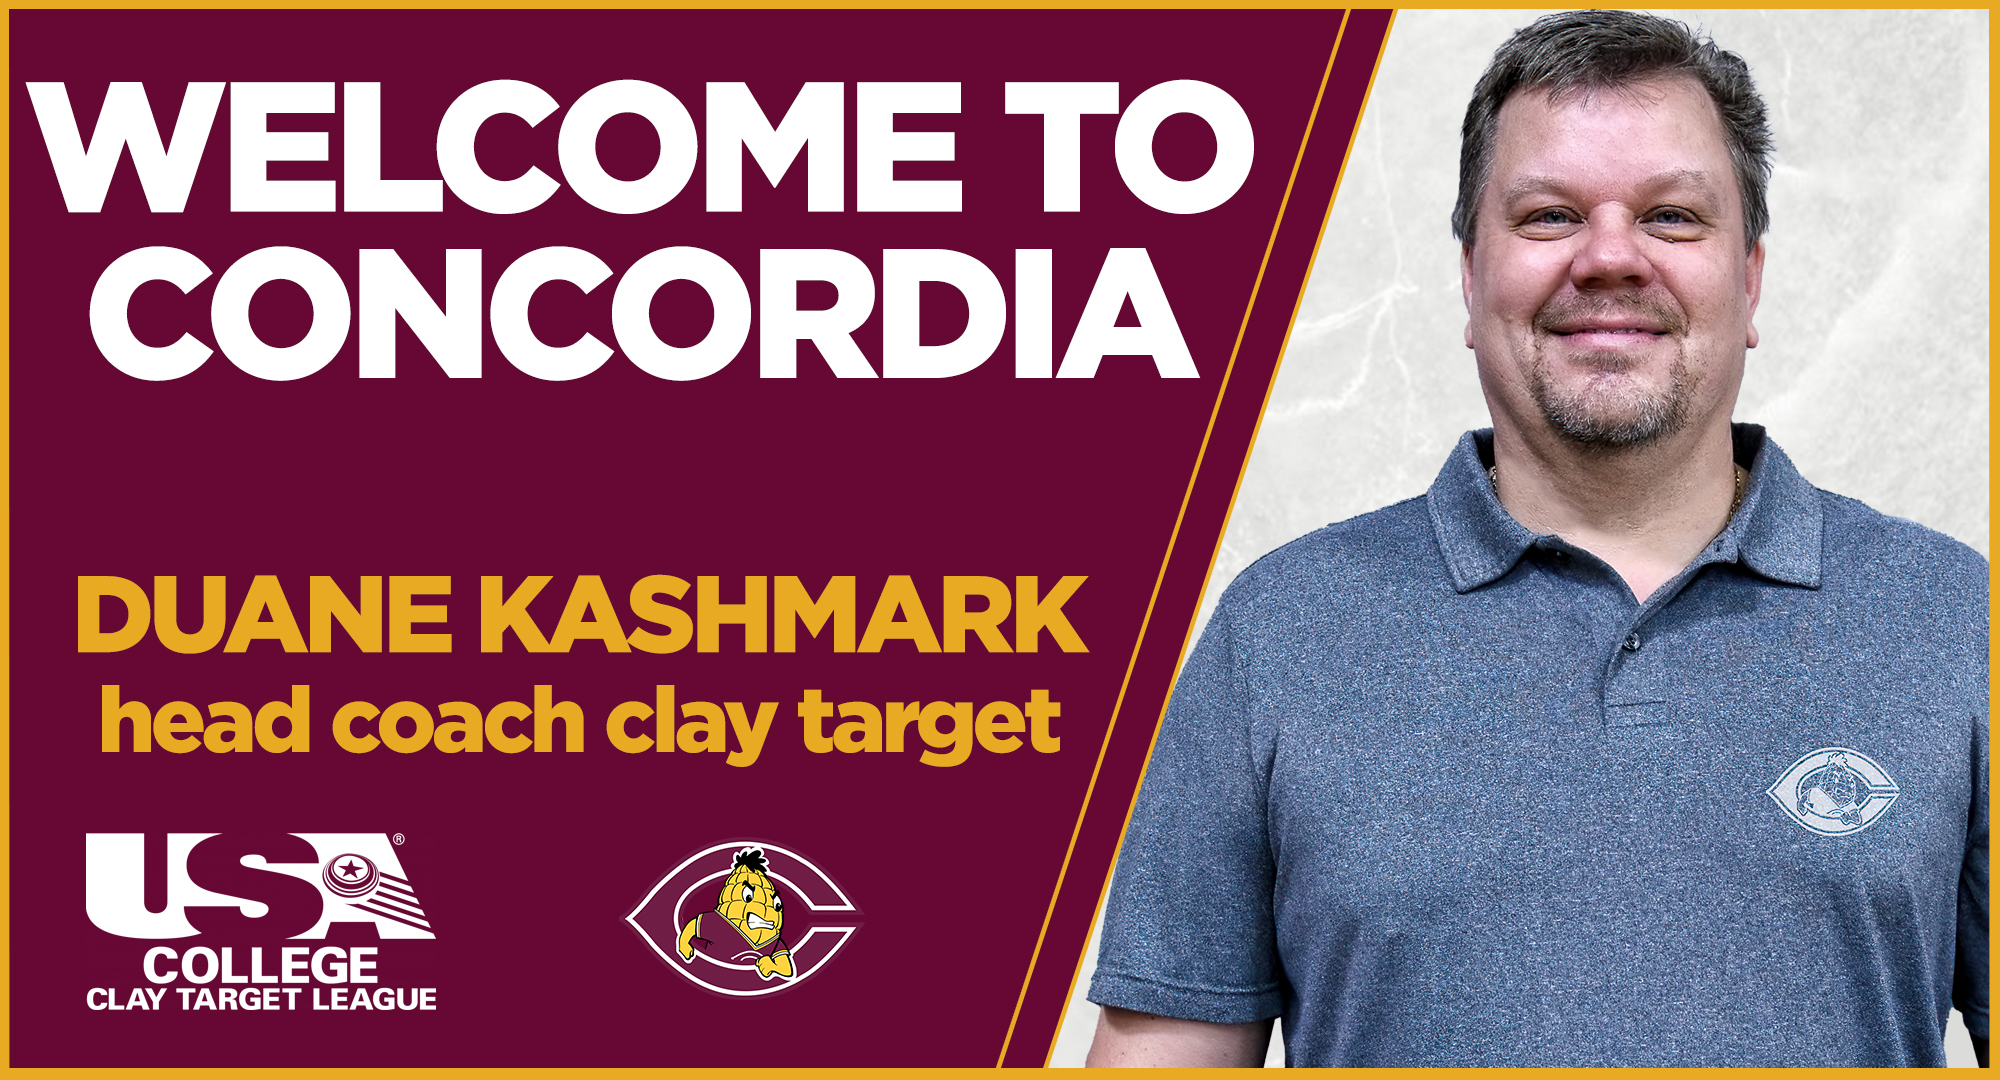 Duane Kashmark was named the head coach for the inaugural Concordia clay target program, which will start competition in the fall of 2024.